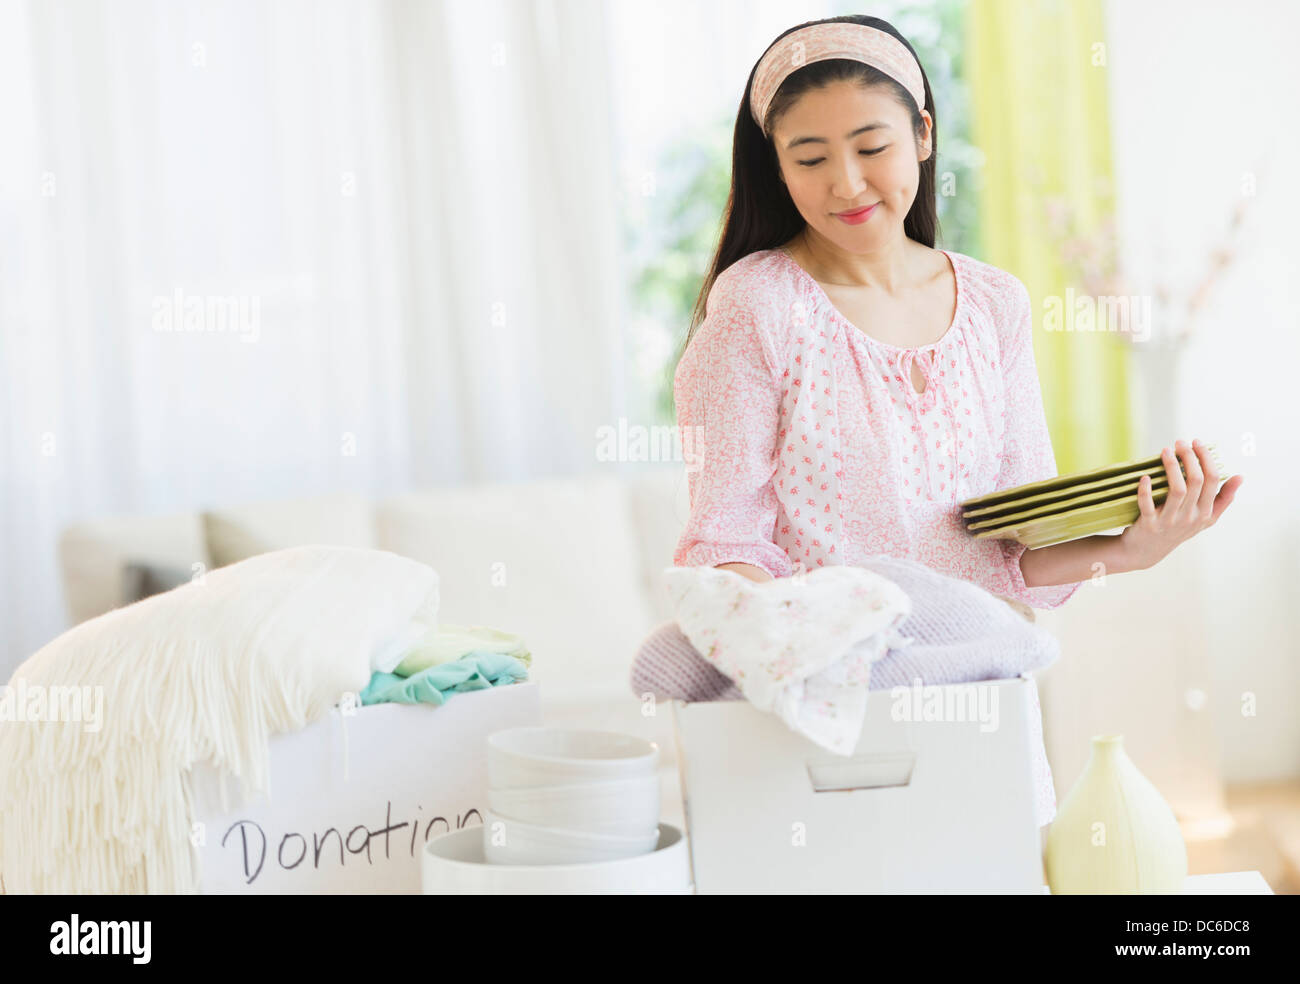 Woman donating household items Stock Photo